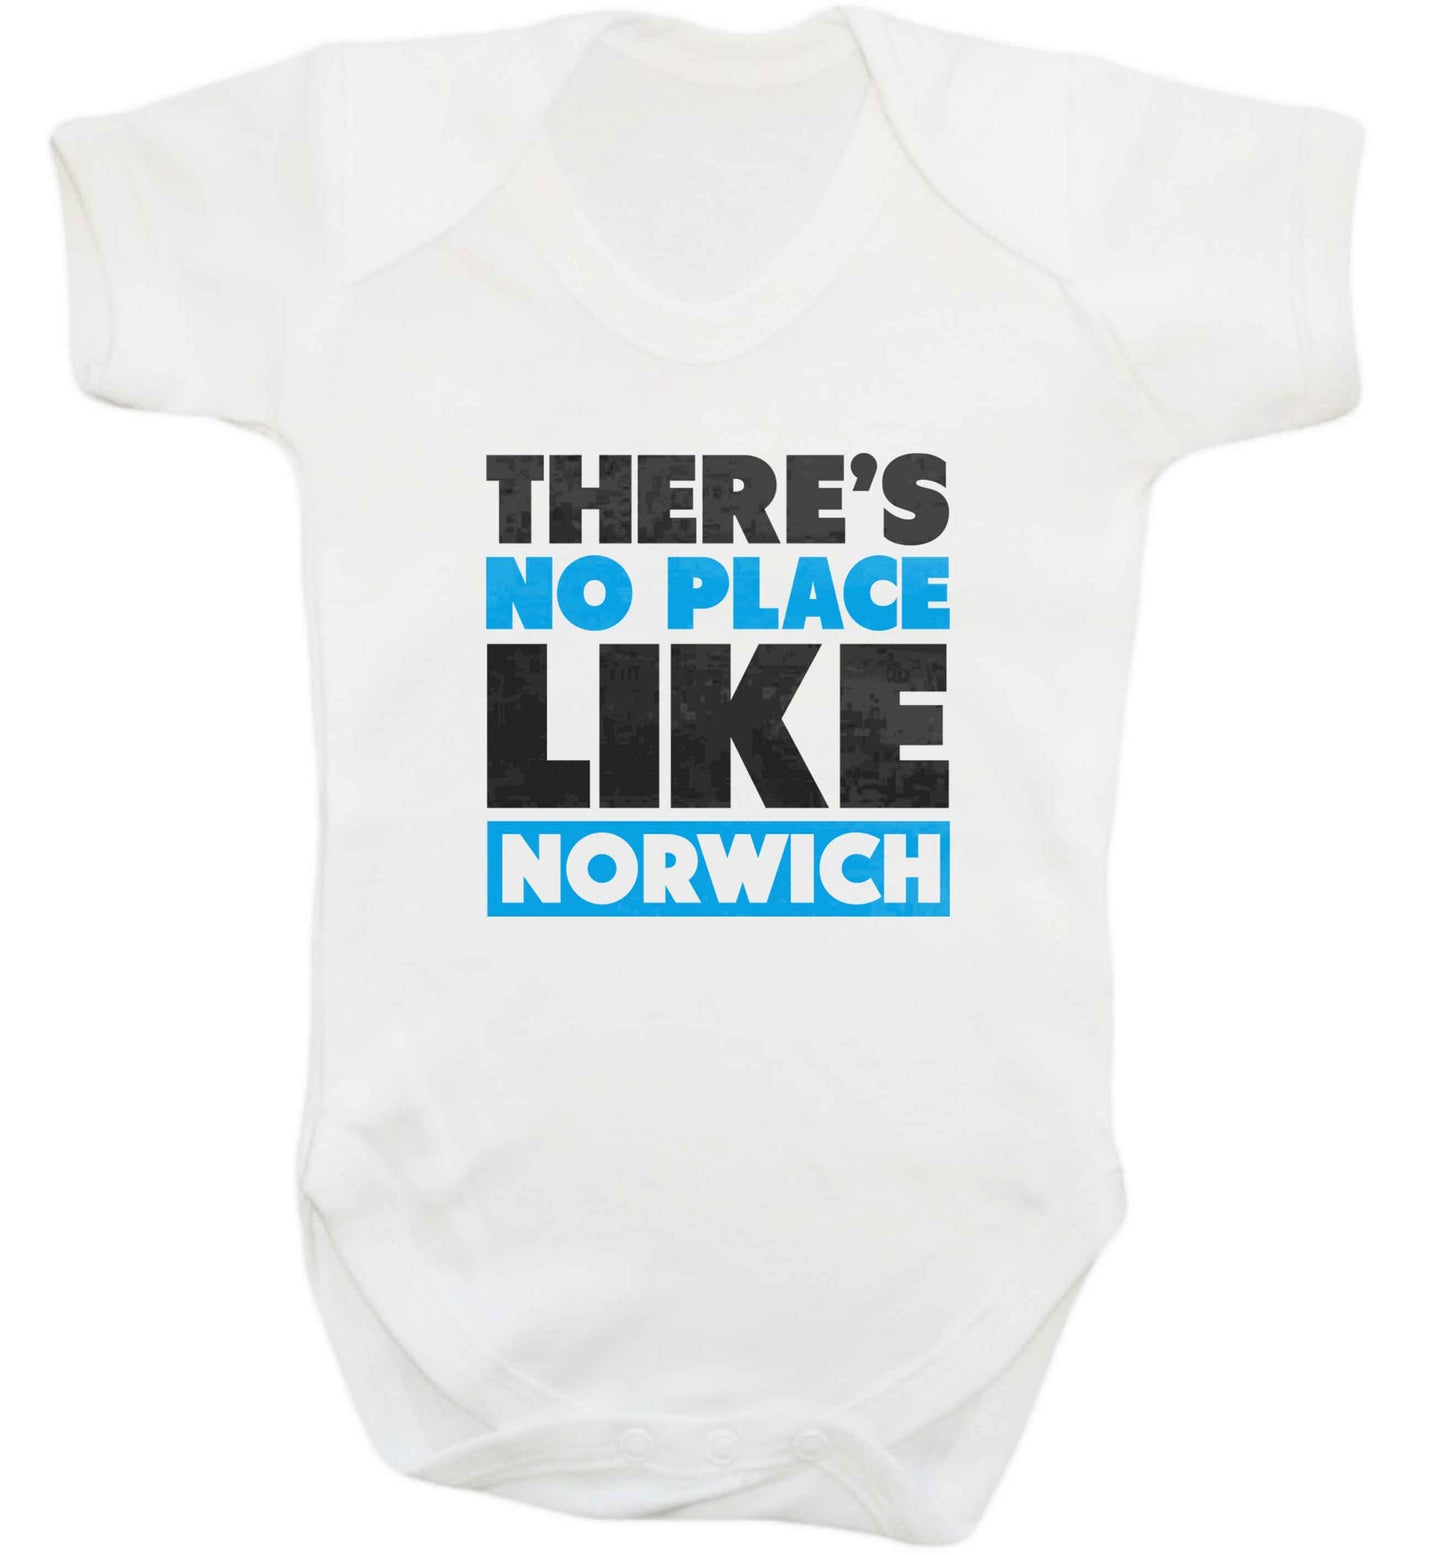 There's no place like Norwich baby vest white 18-24 months